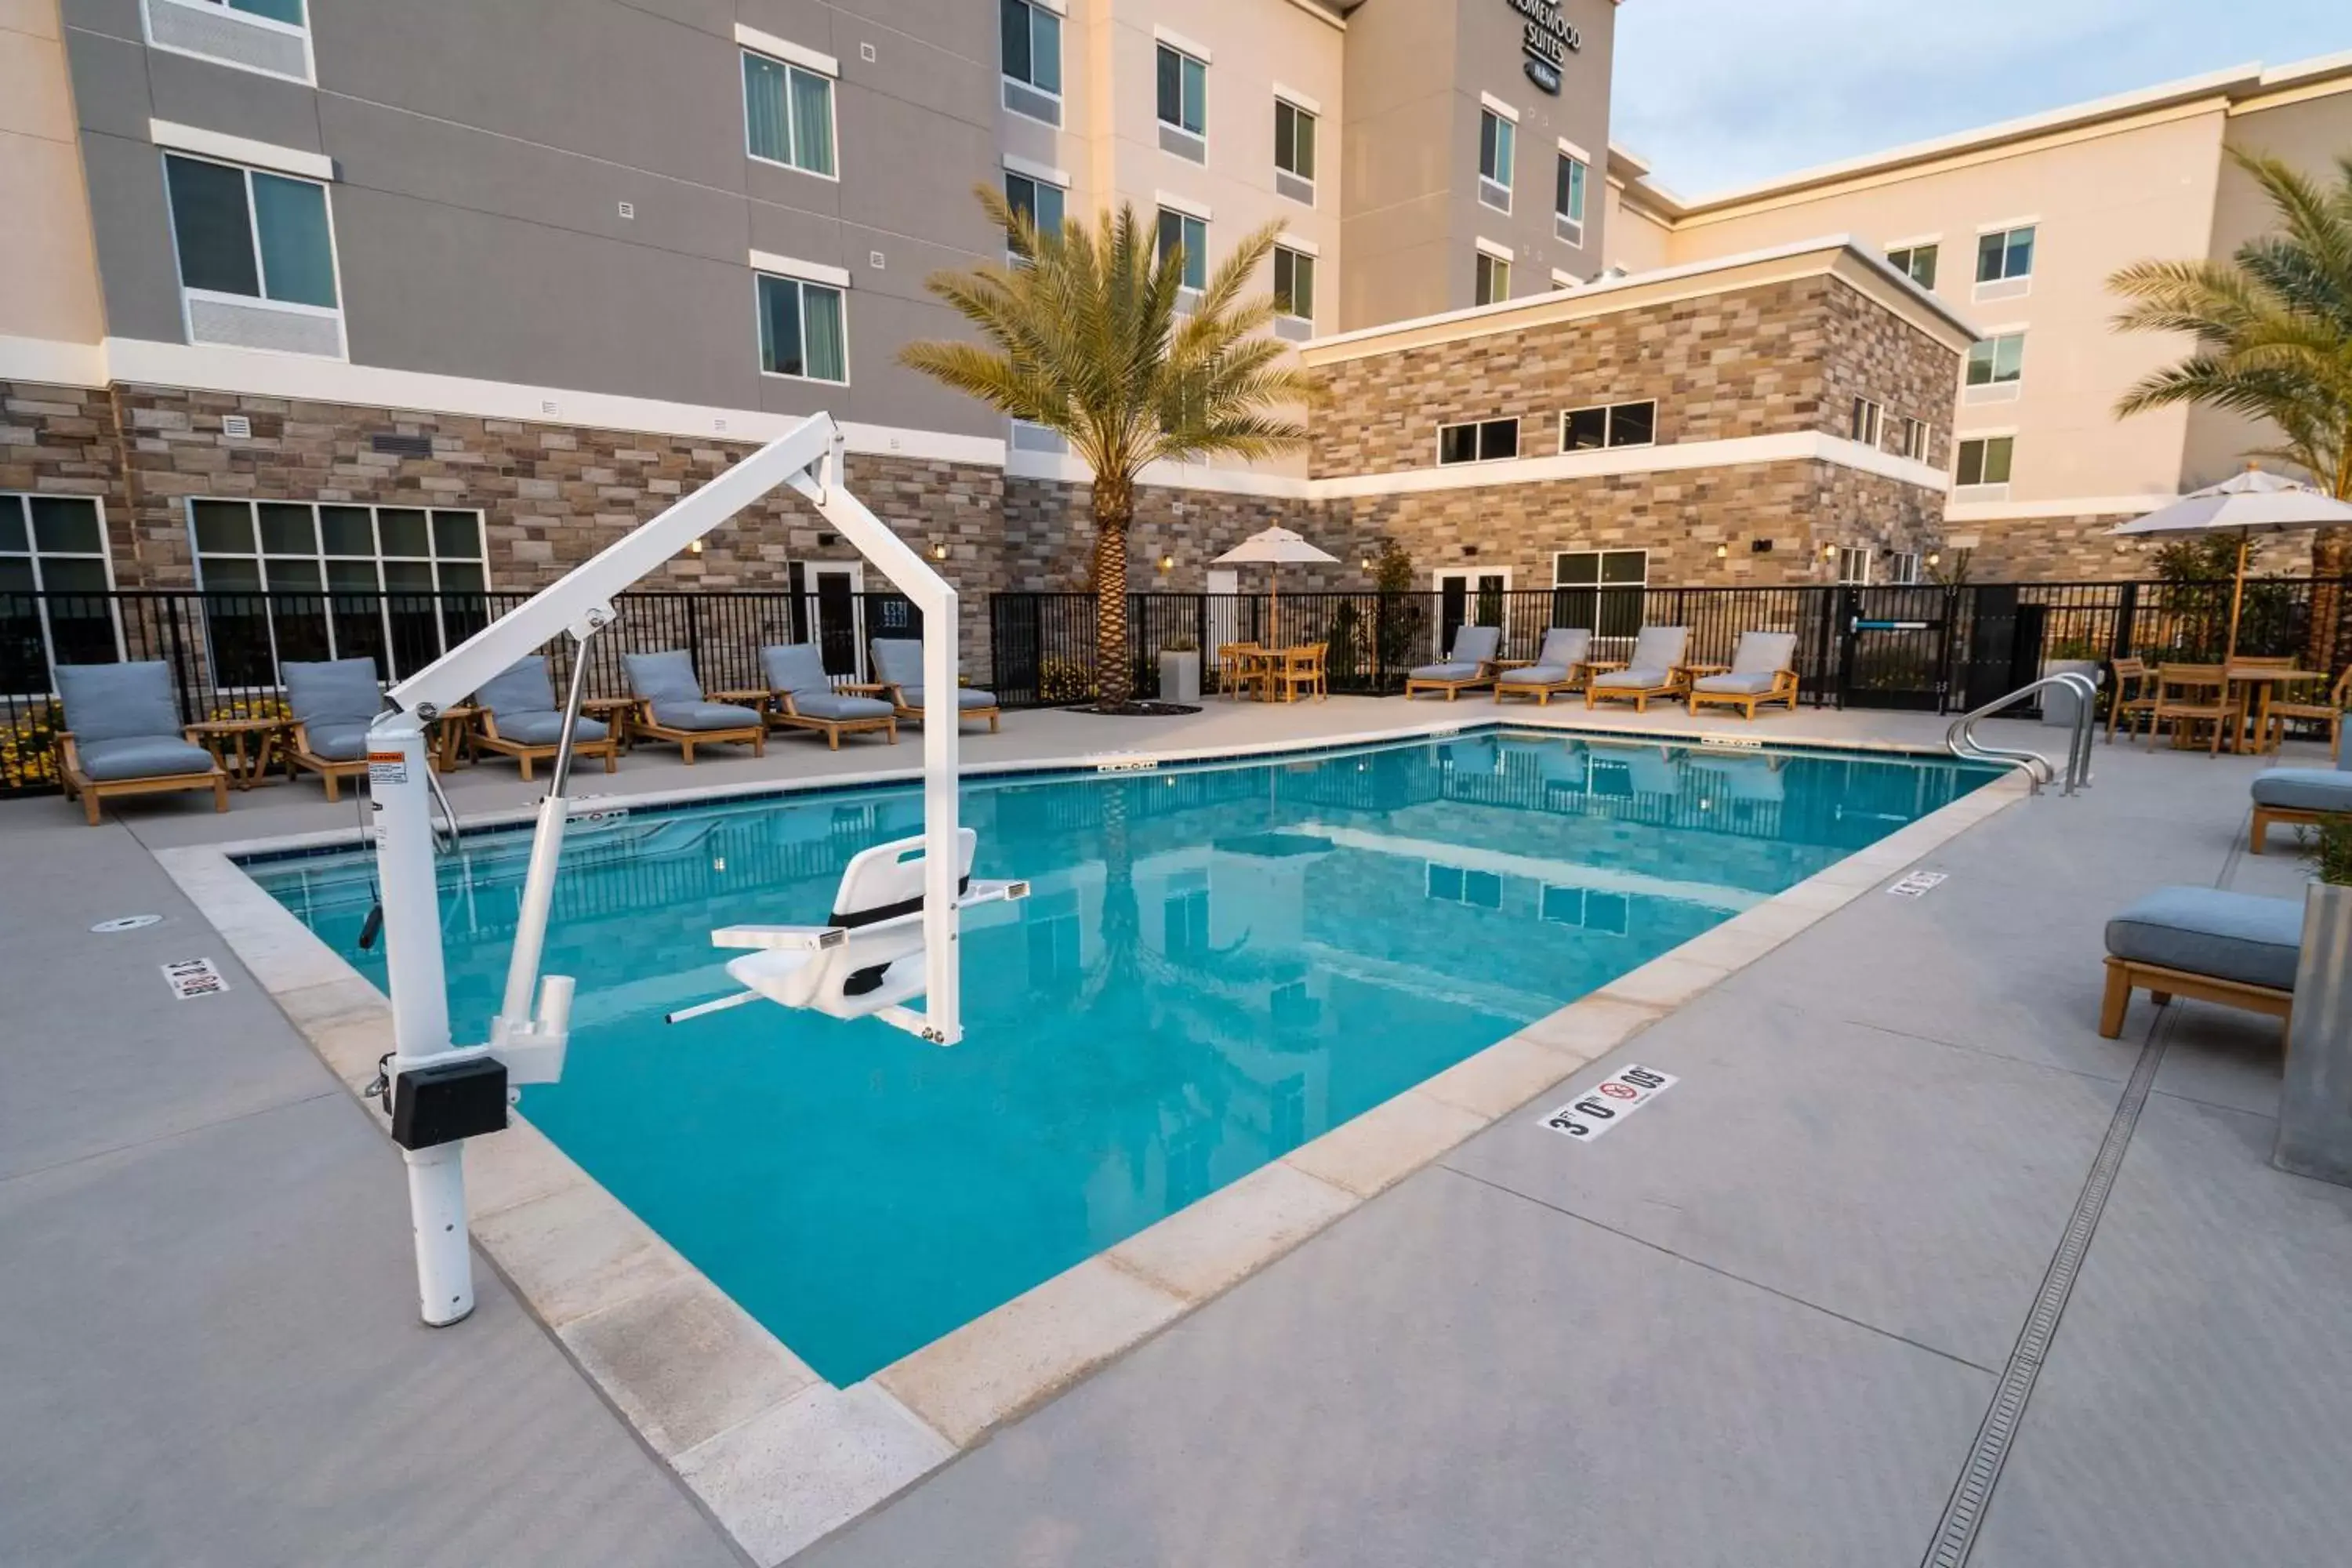 Swimming Pool in Homewood Suites By Hilton Rancho Cordova, Ca